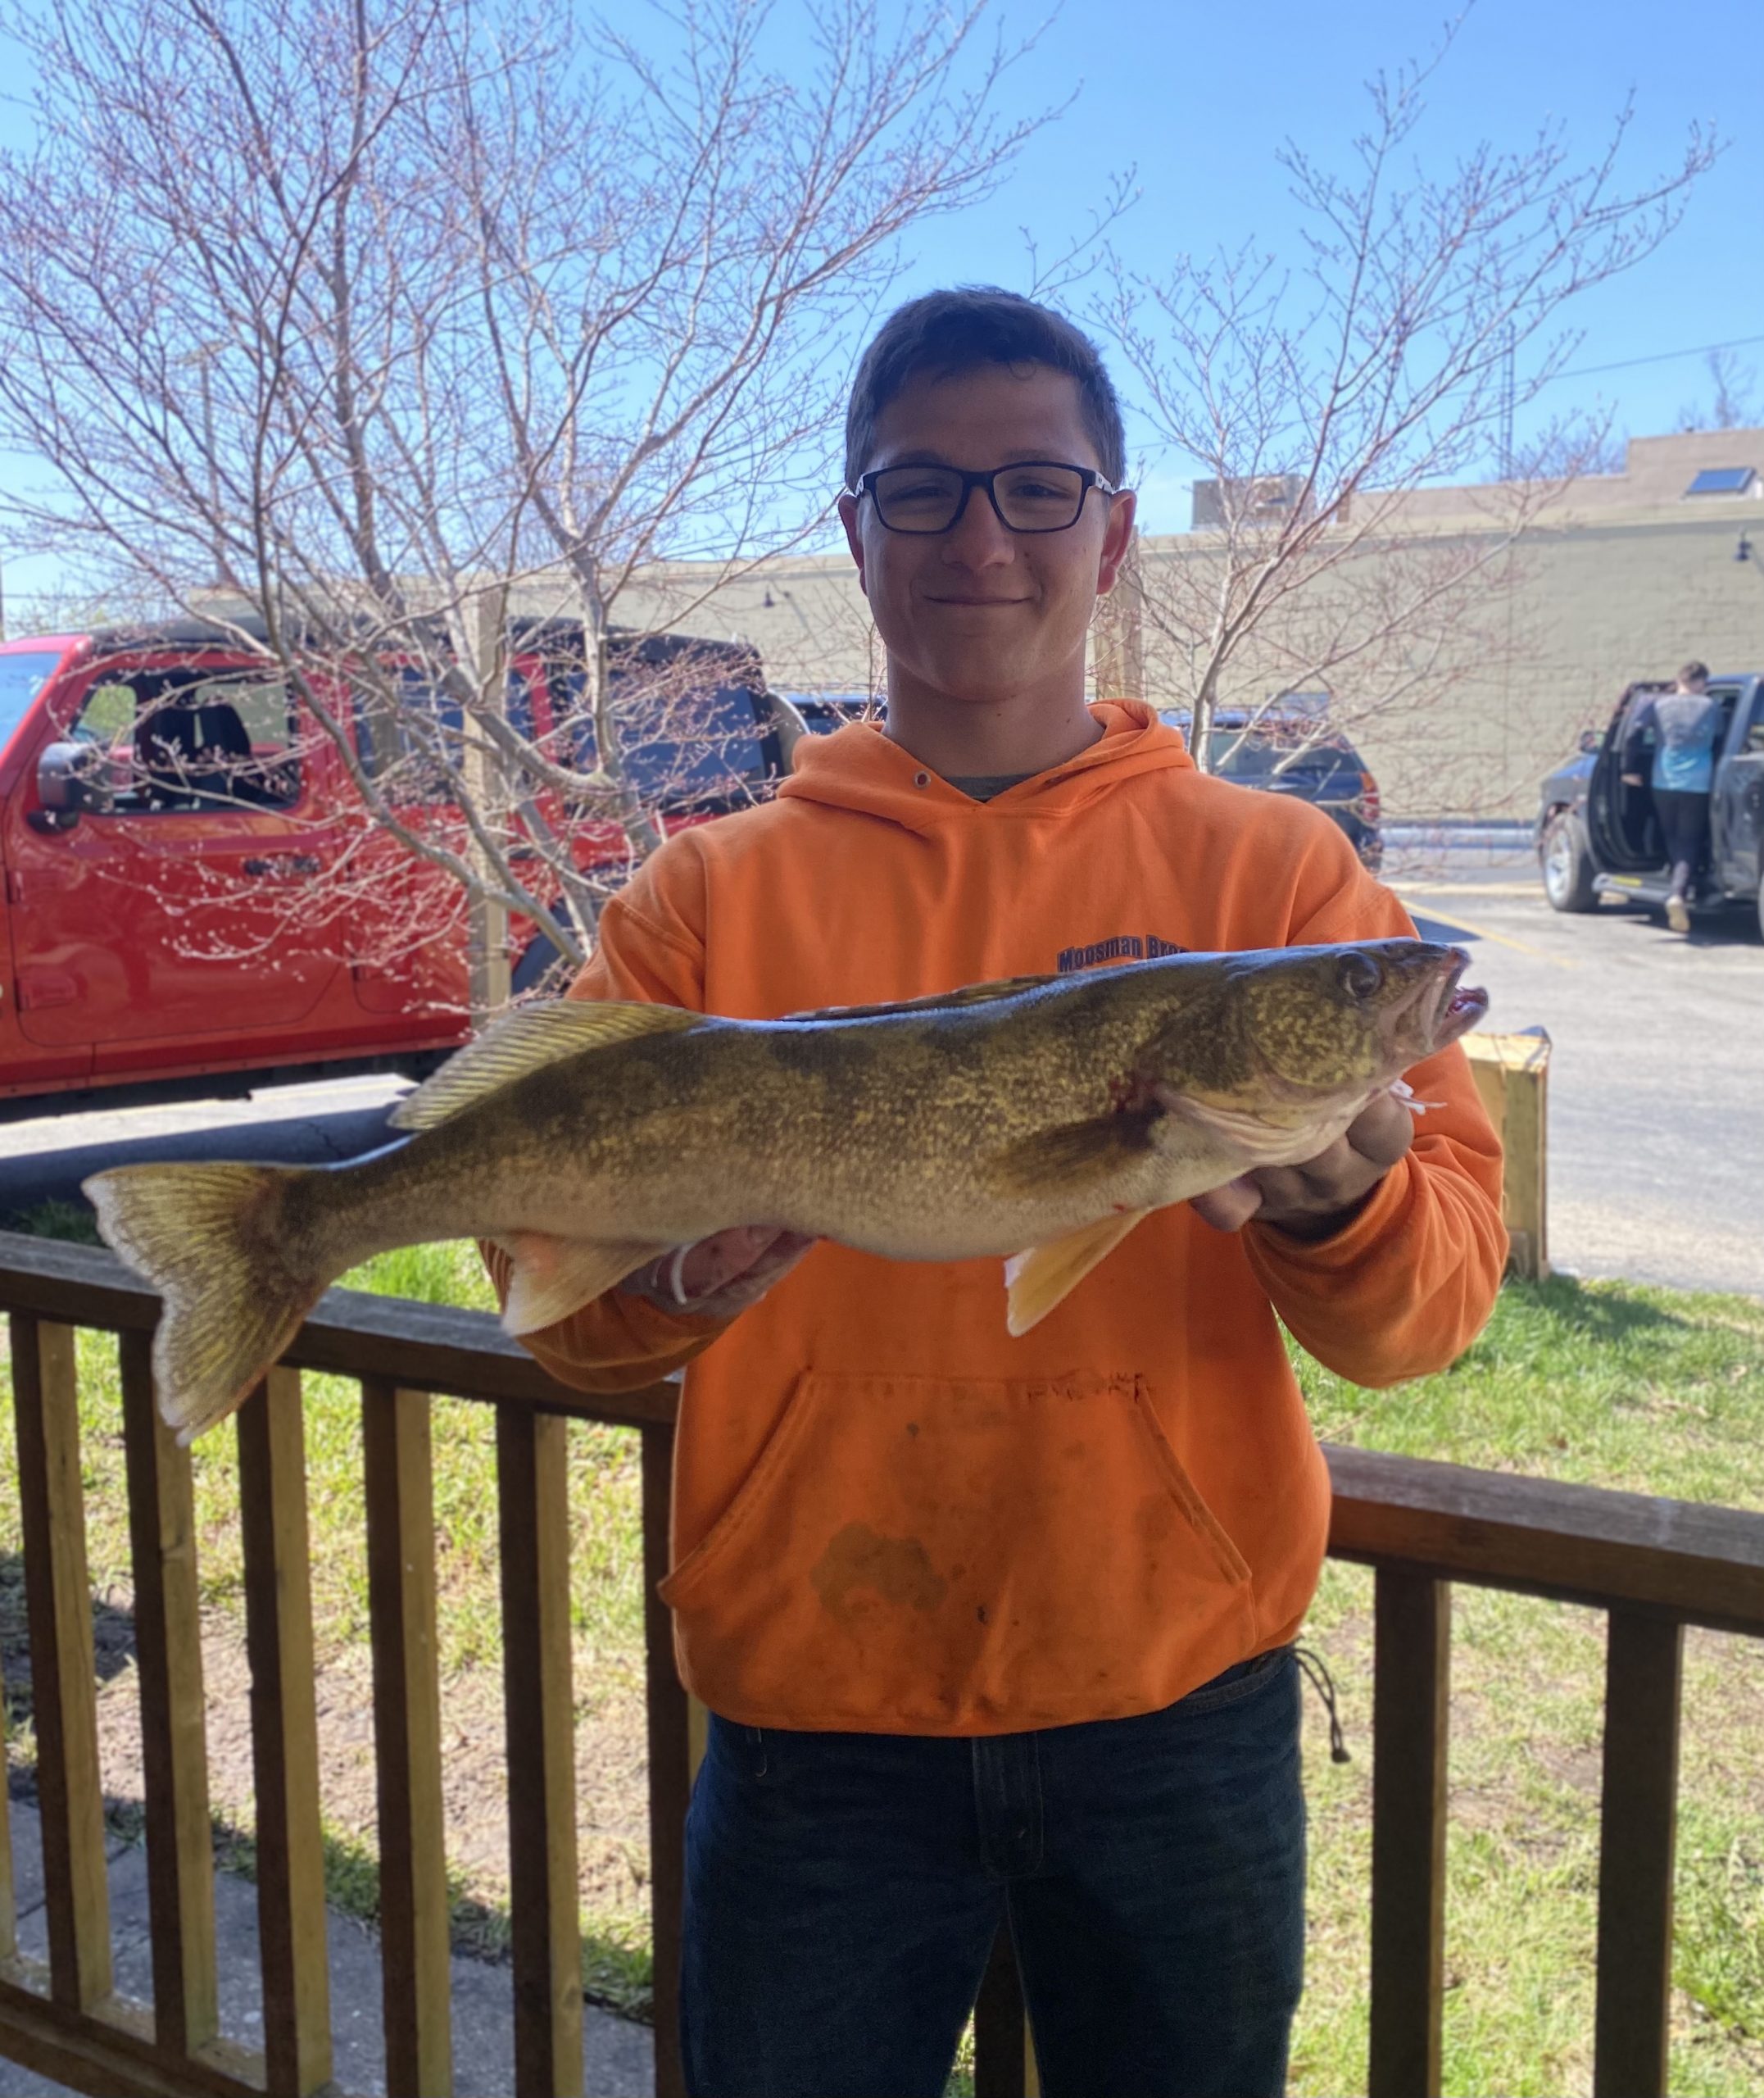 Maumee River Report – 21 April 2022